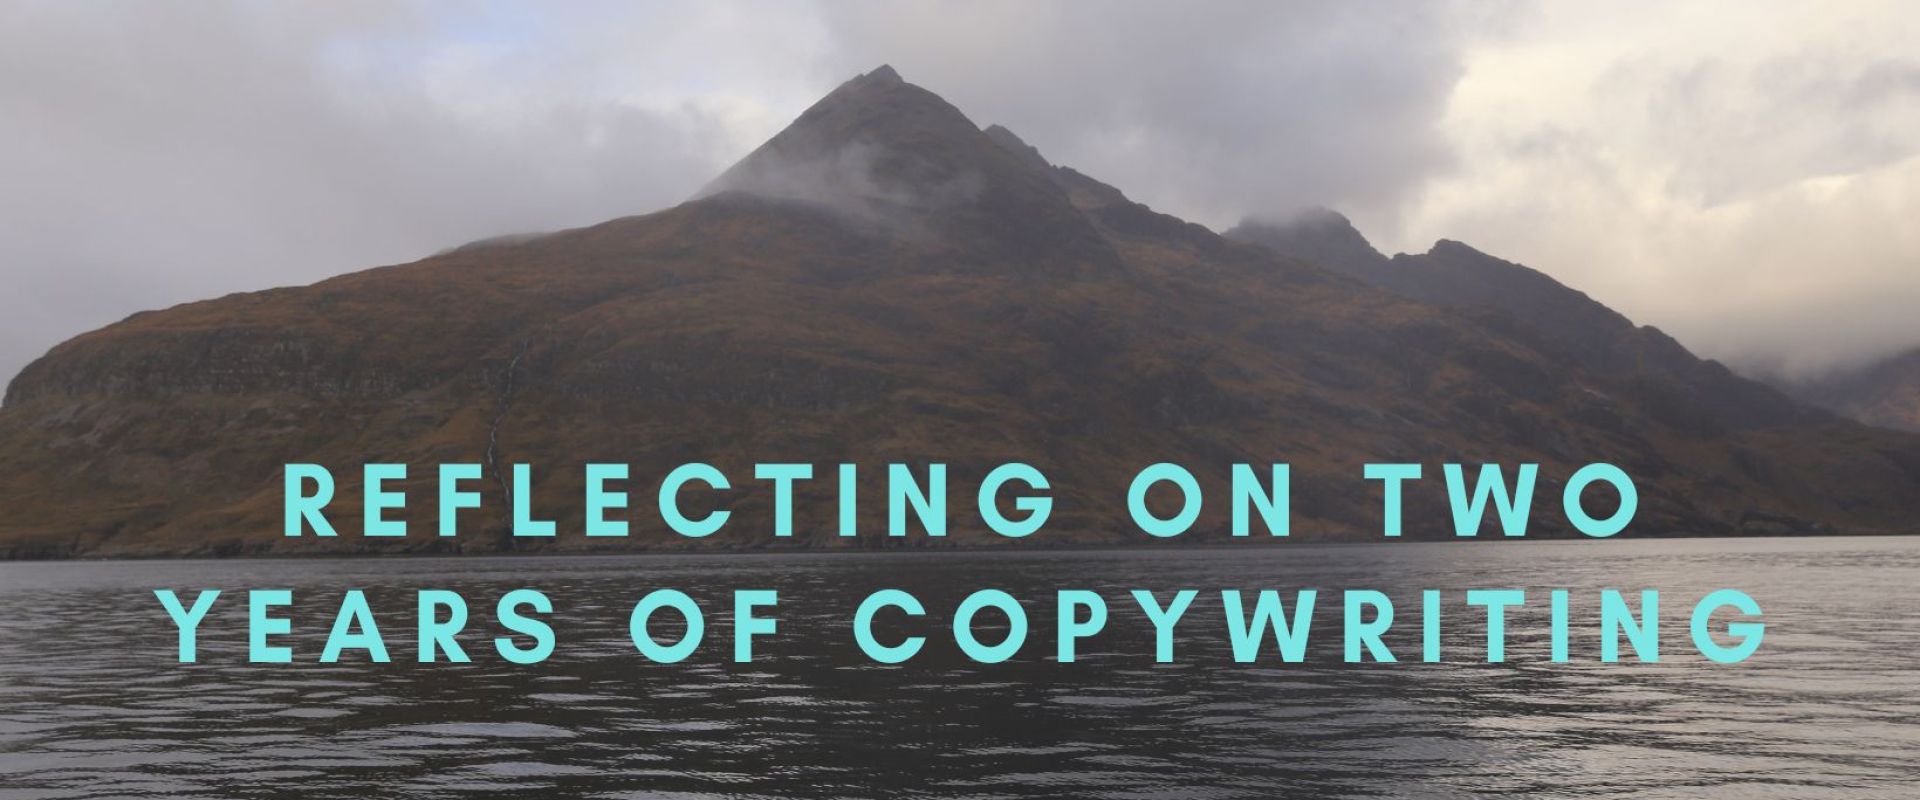 Reflecting on two years of copywriting